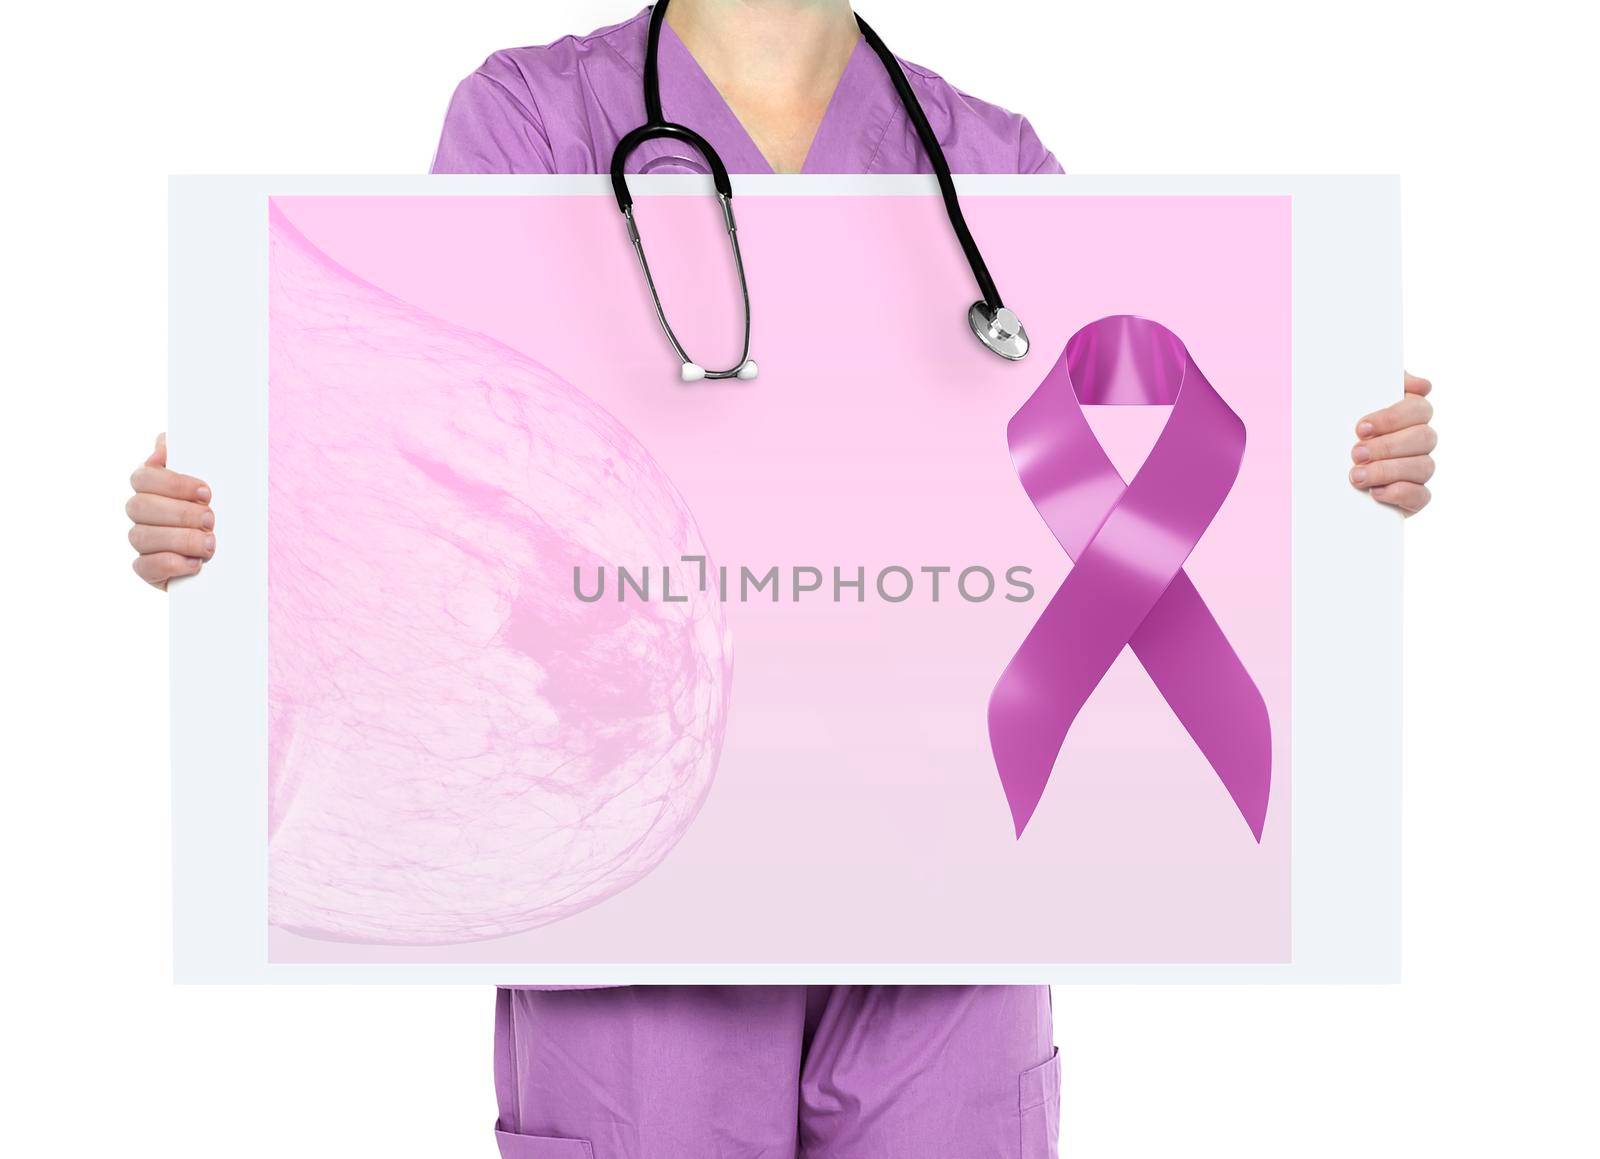 Doctor Hands Holding Pink Cancer Awareness Ribbon with mammography for breast cancer awareness against woman Poster for fight against breast cancer Clipping path.